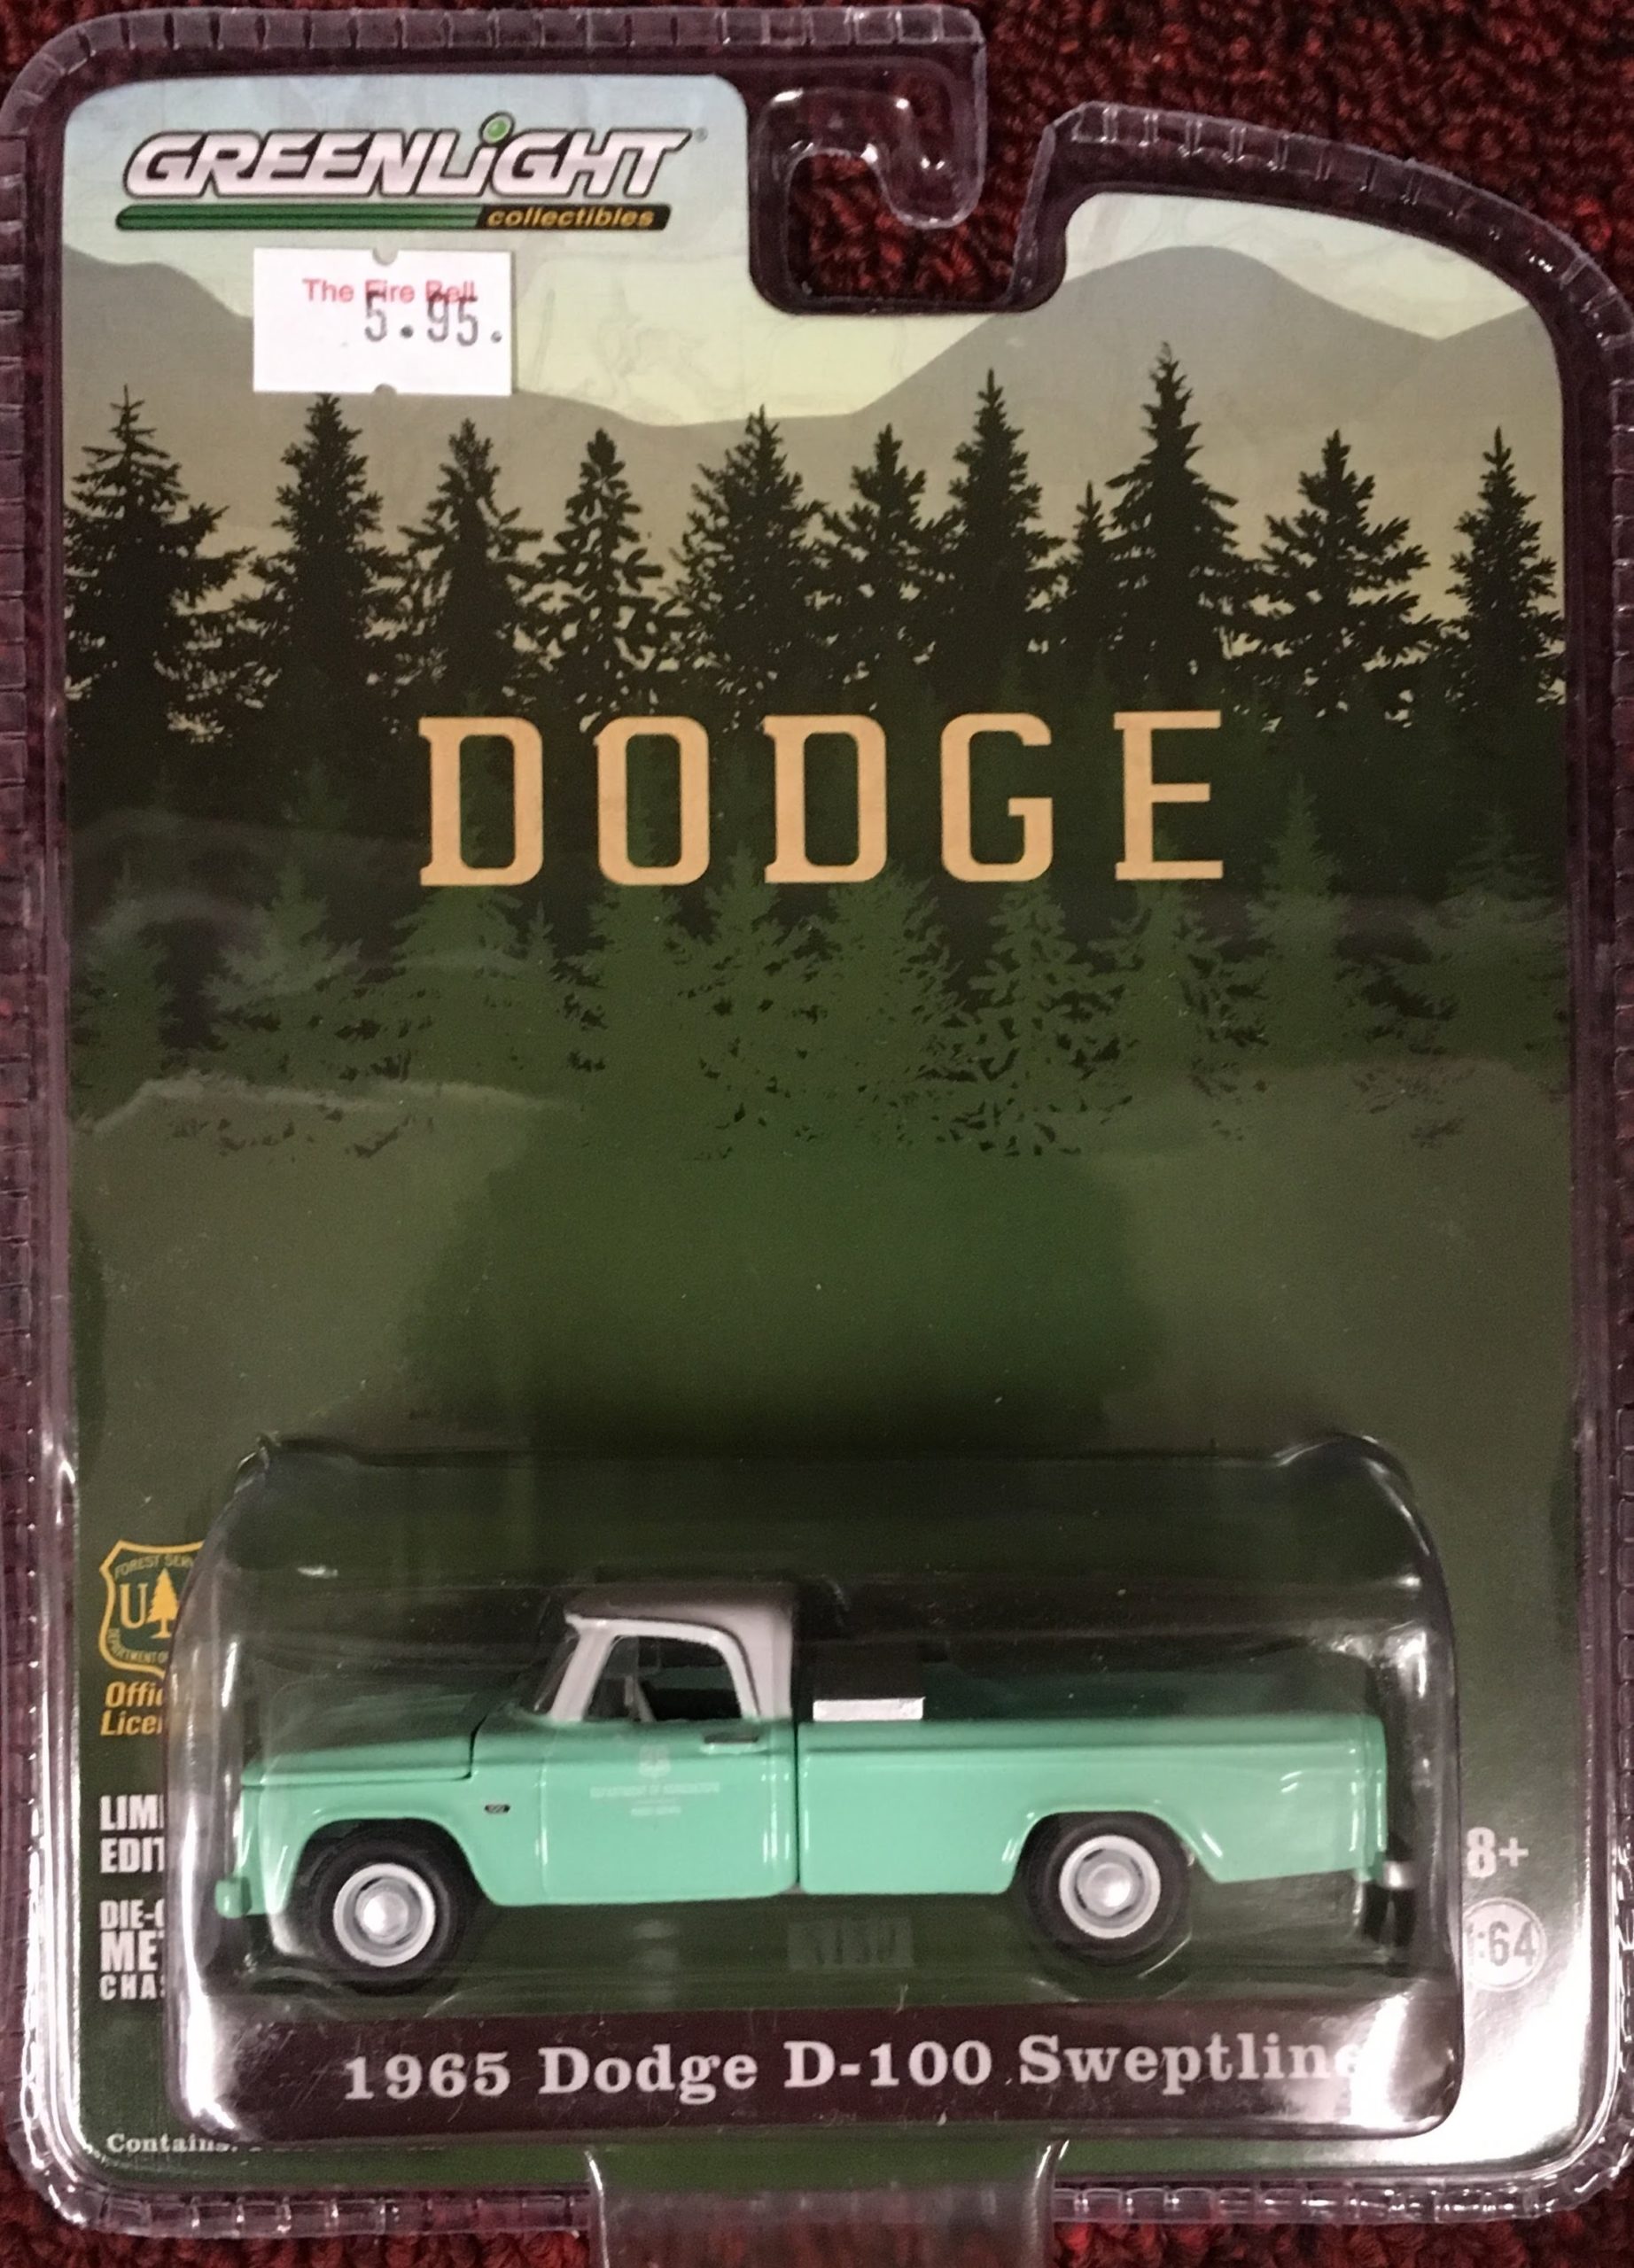 Dodge D-100 1965 Sweptline, Forest Service Dept. 1:64th Scale